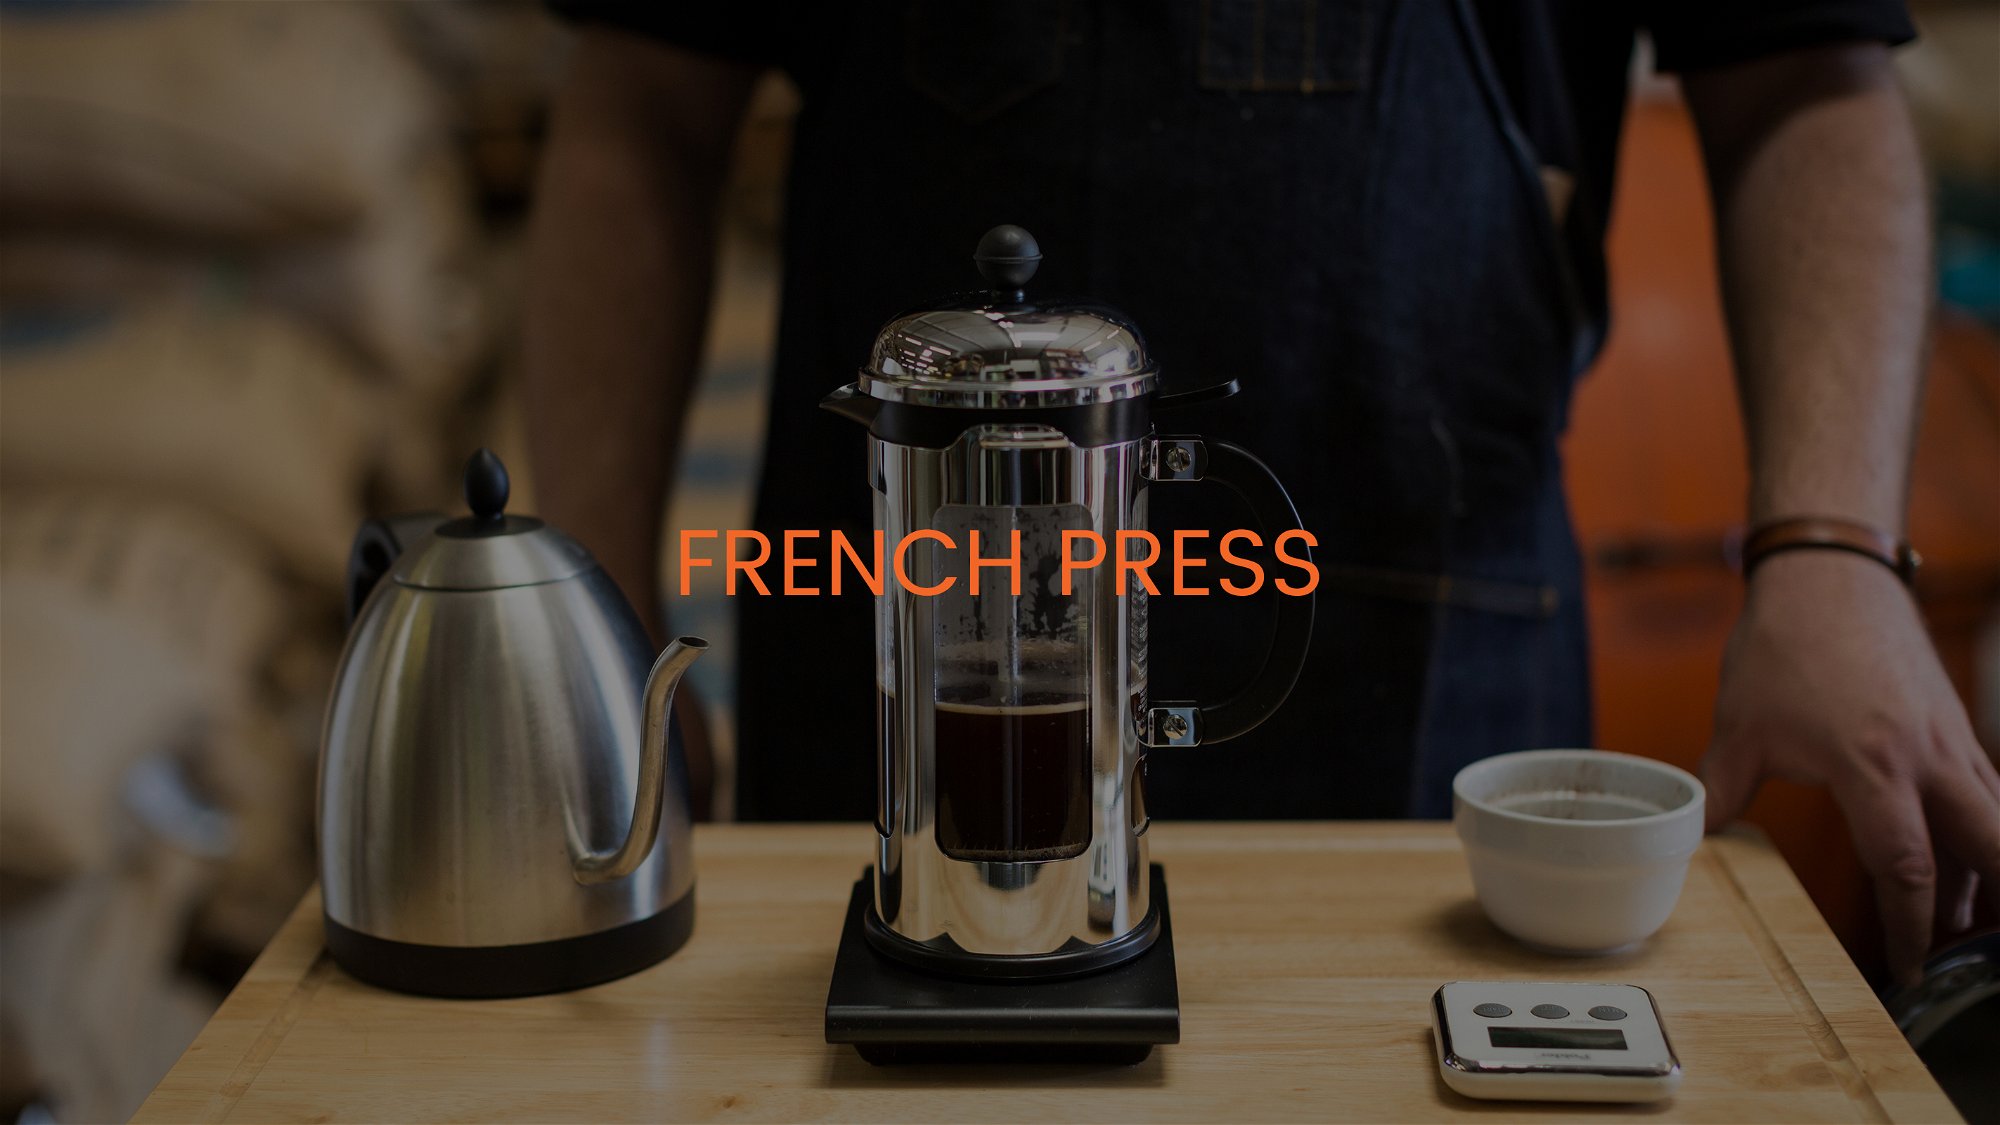 FRENCH PRESS - WITH KETTLE, SCALE AND TIMER